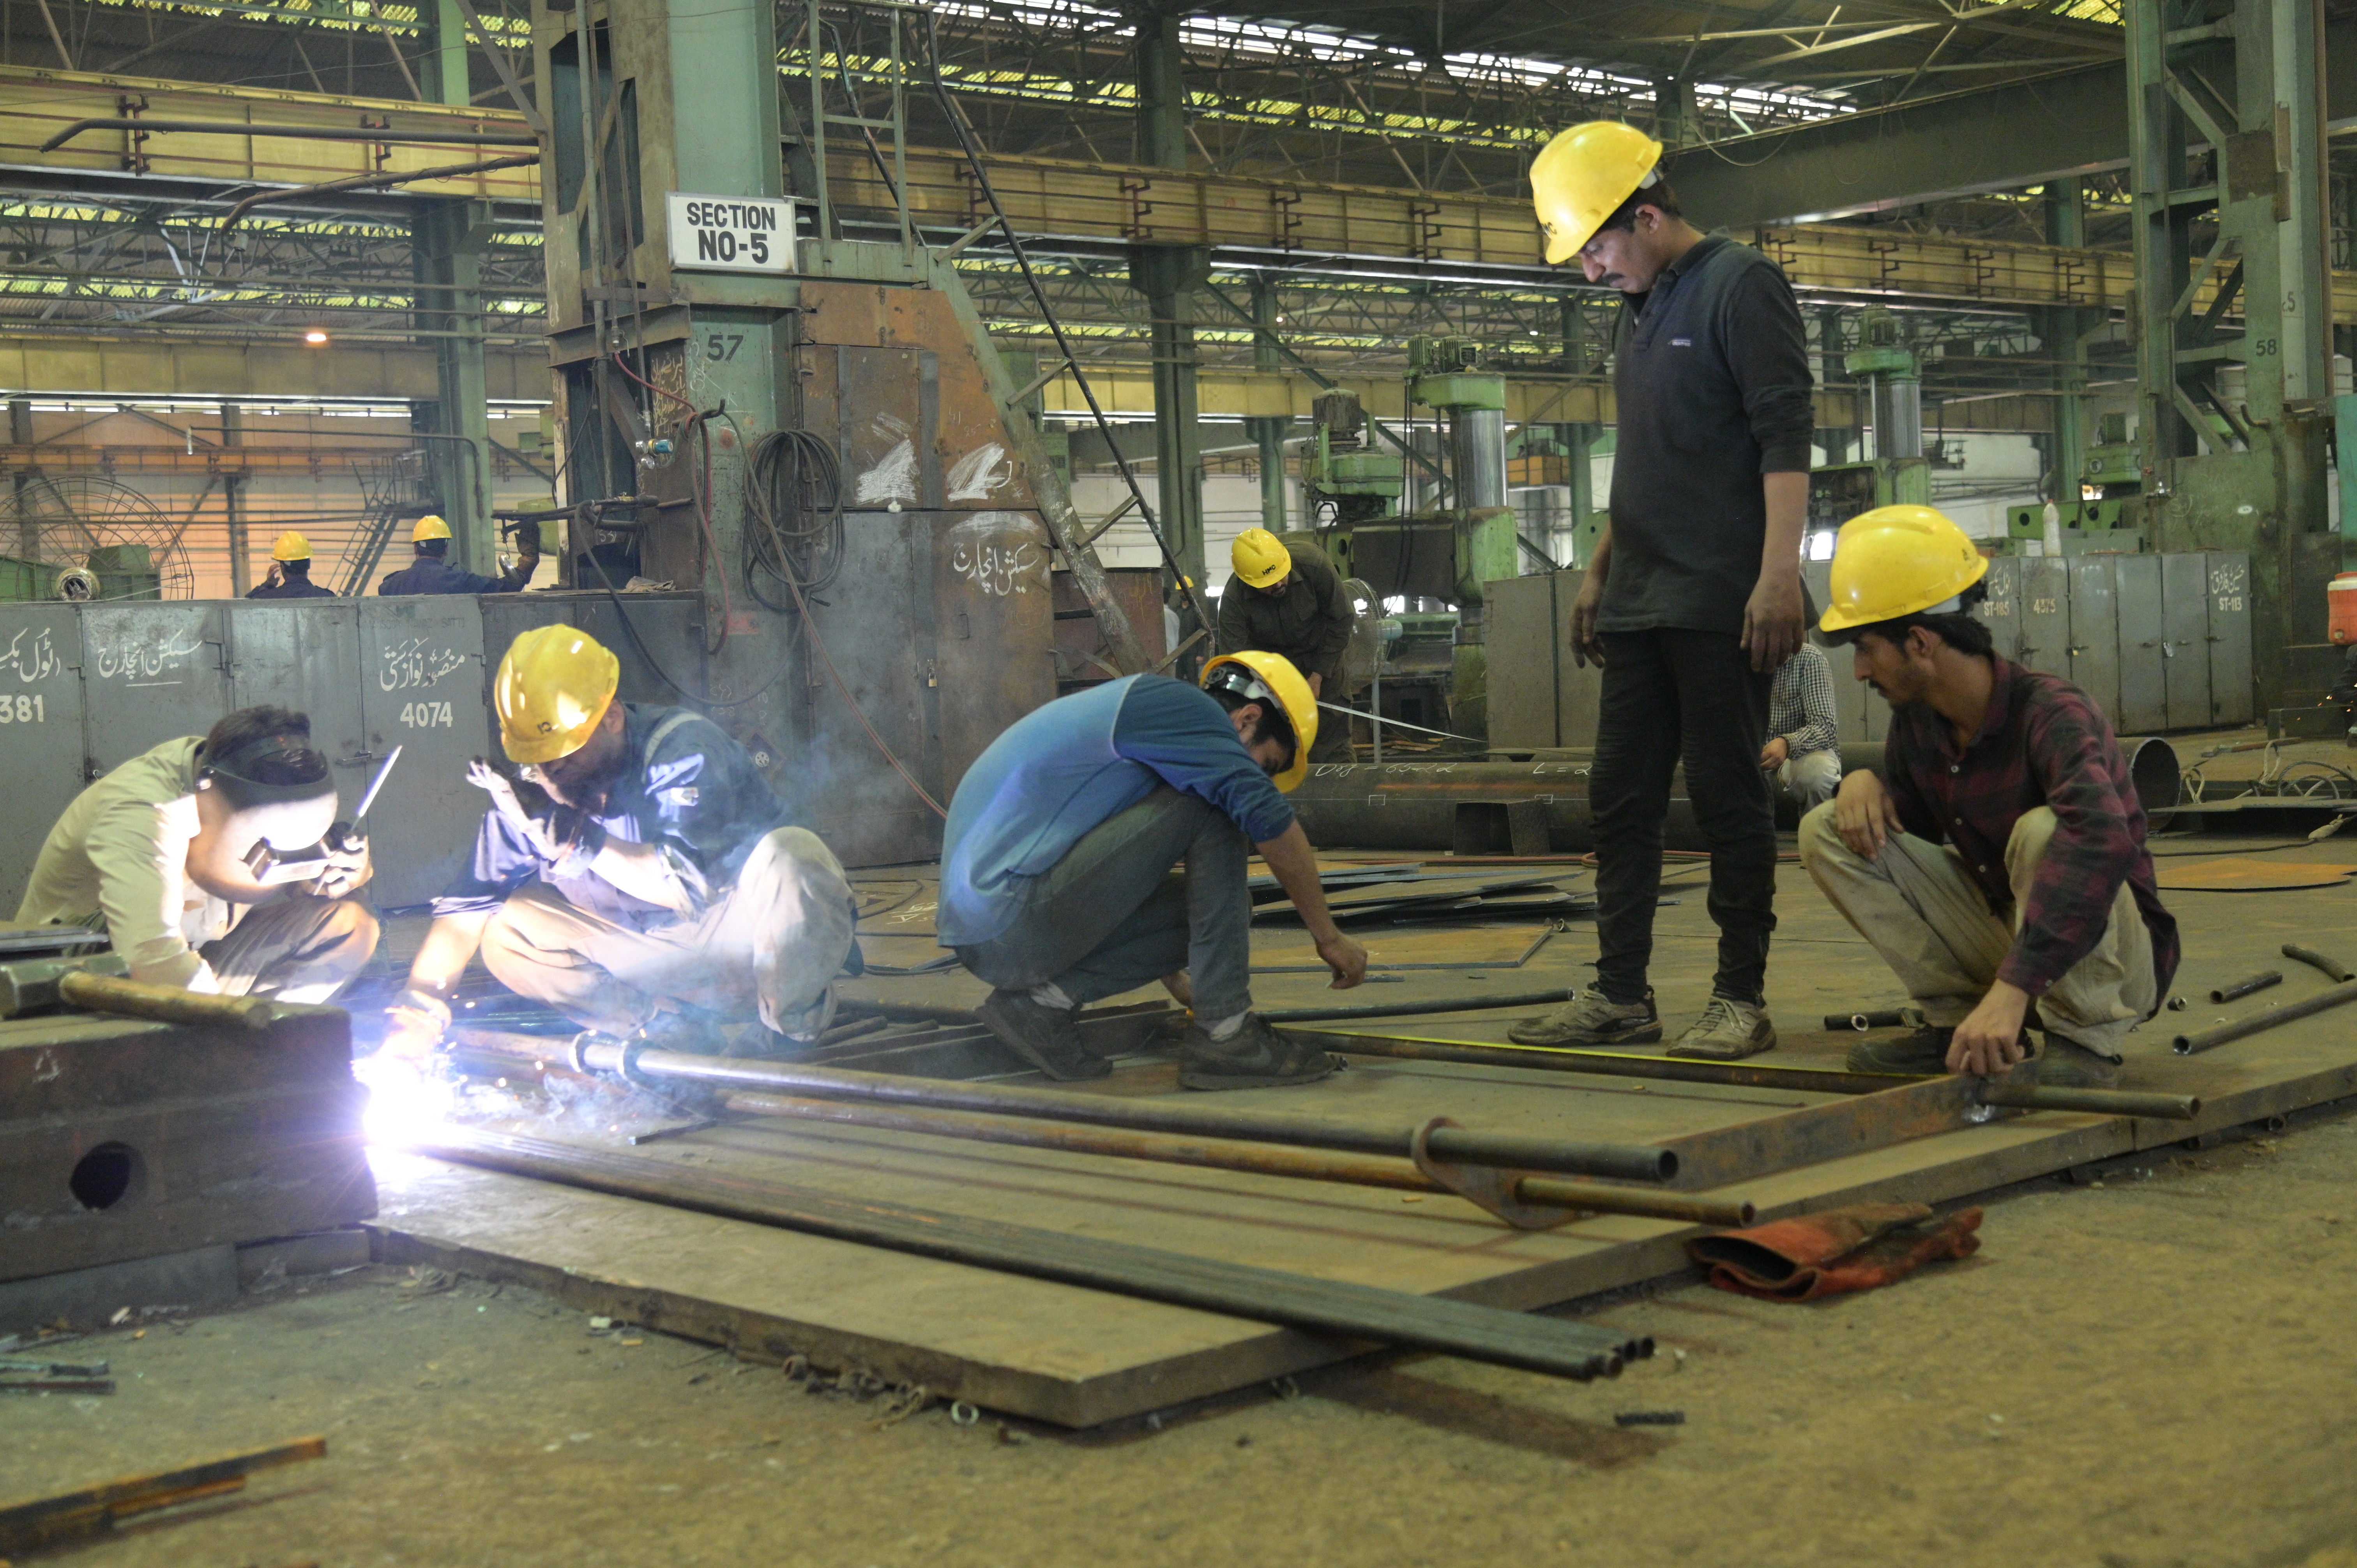 Workers welding the cylindrical pipes